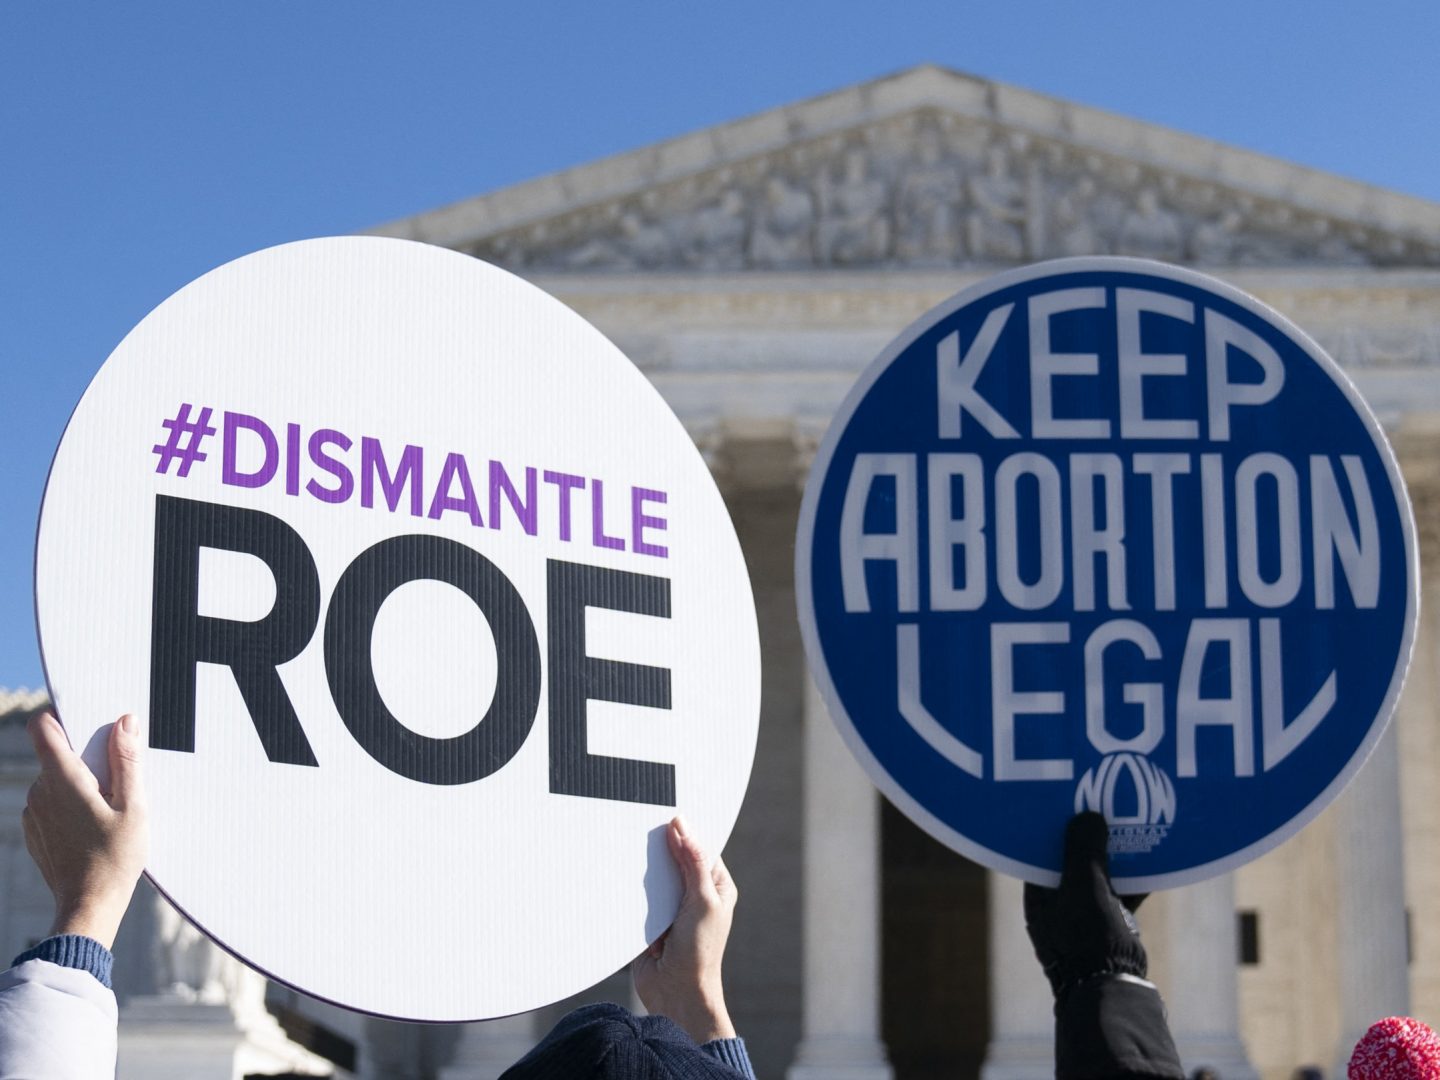 Pro-life activists counter-demonstrate as pro-choice activists participate in a 